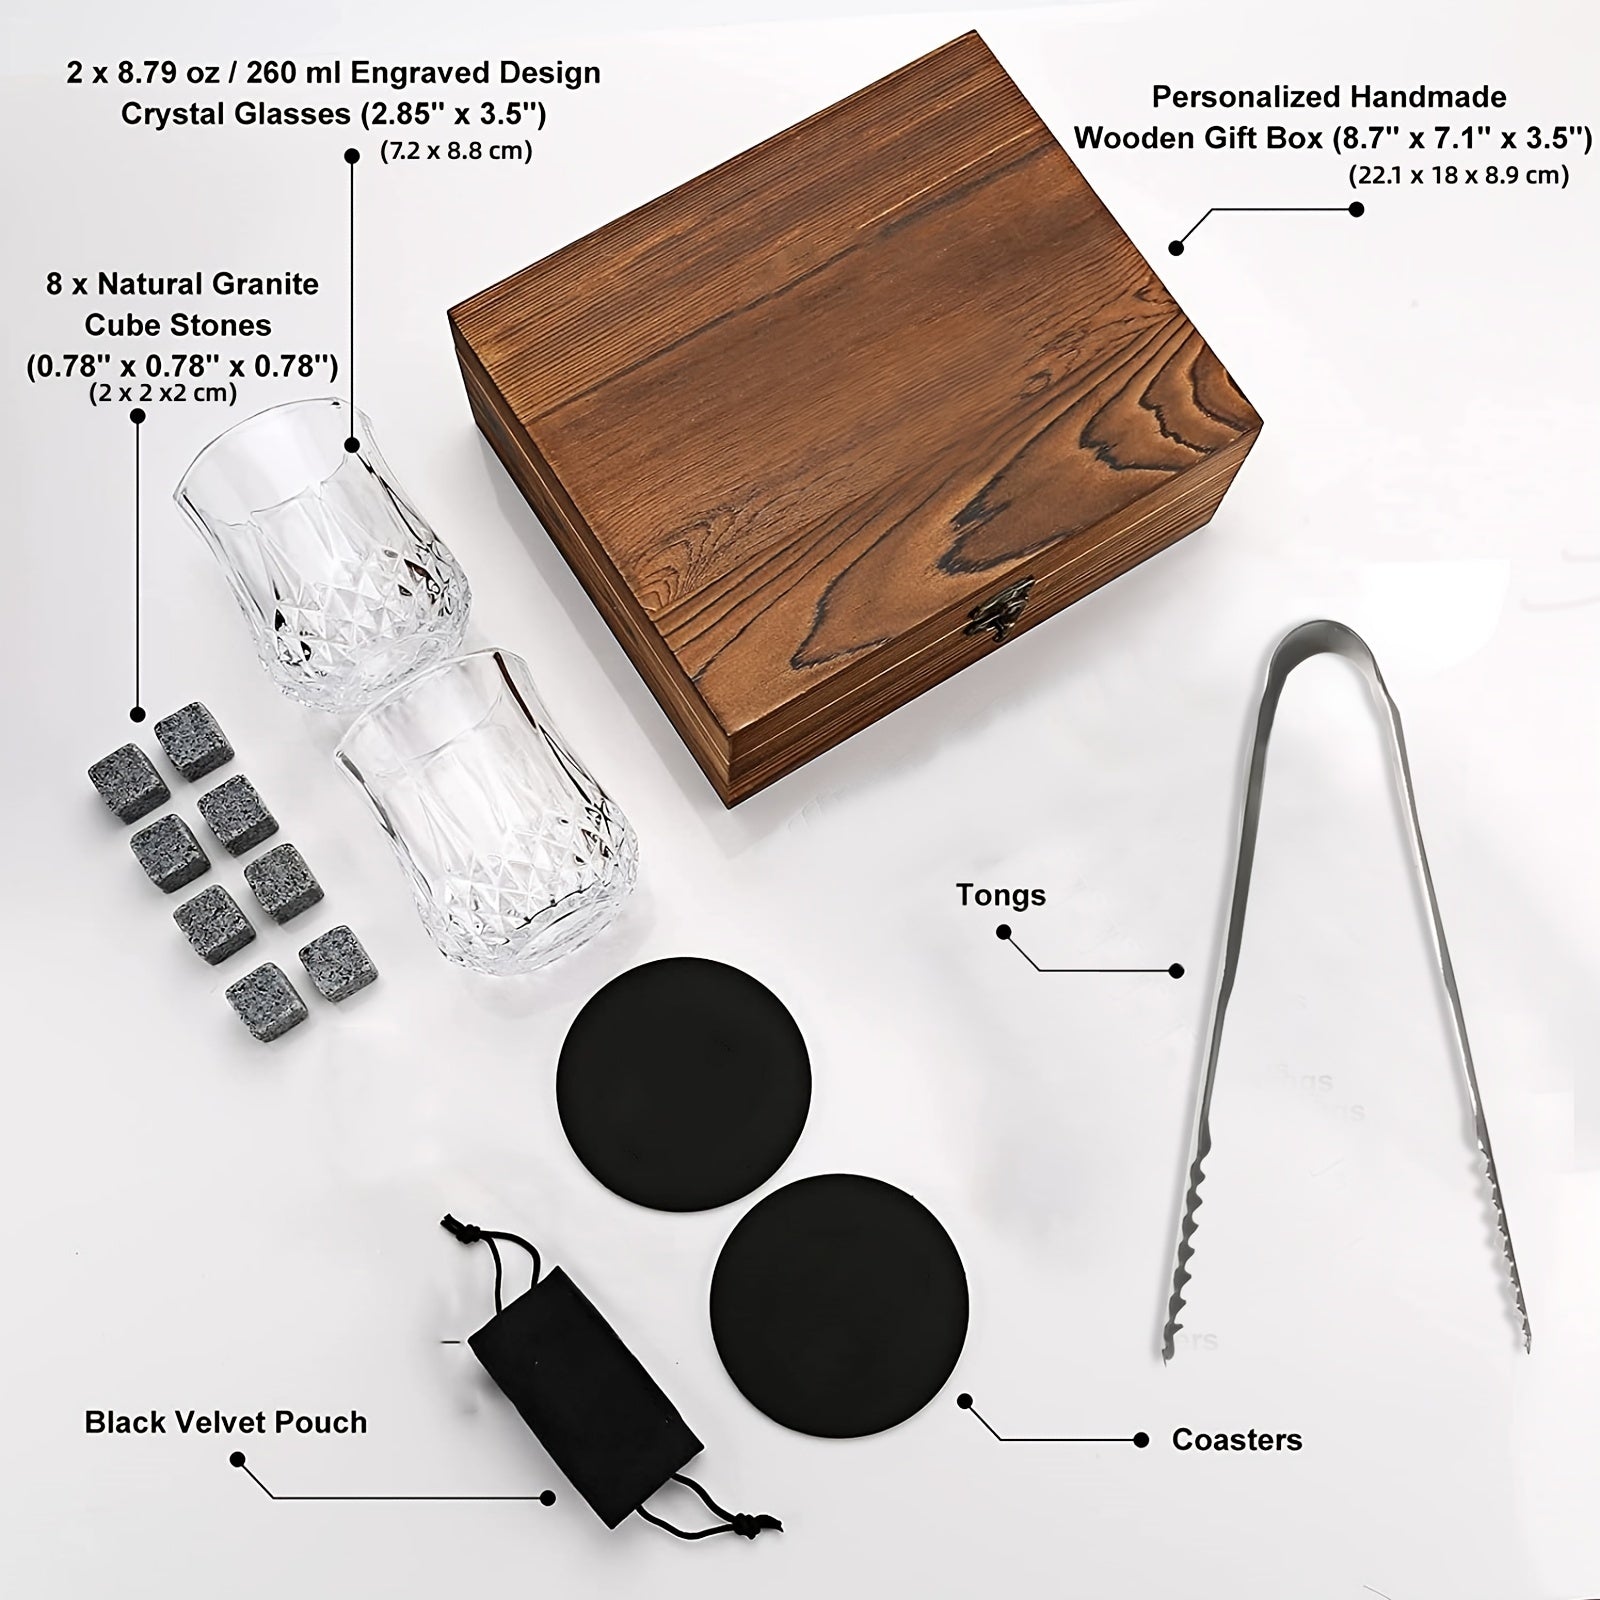 1 Set Gift Box Kit For Whiskey Stones And Whiskey Glass, 8pcs Granite Chilling Whisky Rocks + 2pcs Glasses Cup, With Wooden Storage Box, Best Gift For Men, Father's Day Dad's Birthday Thanksgiving New Year Gift - Le Coin Du Barman : Le Spécialiste Des Cocktails